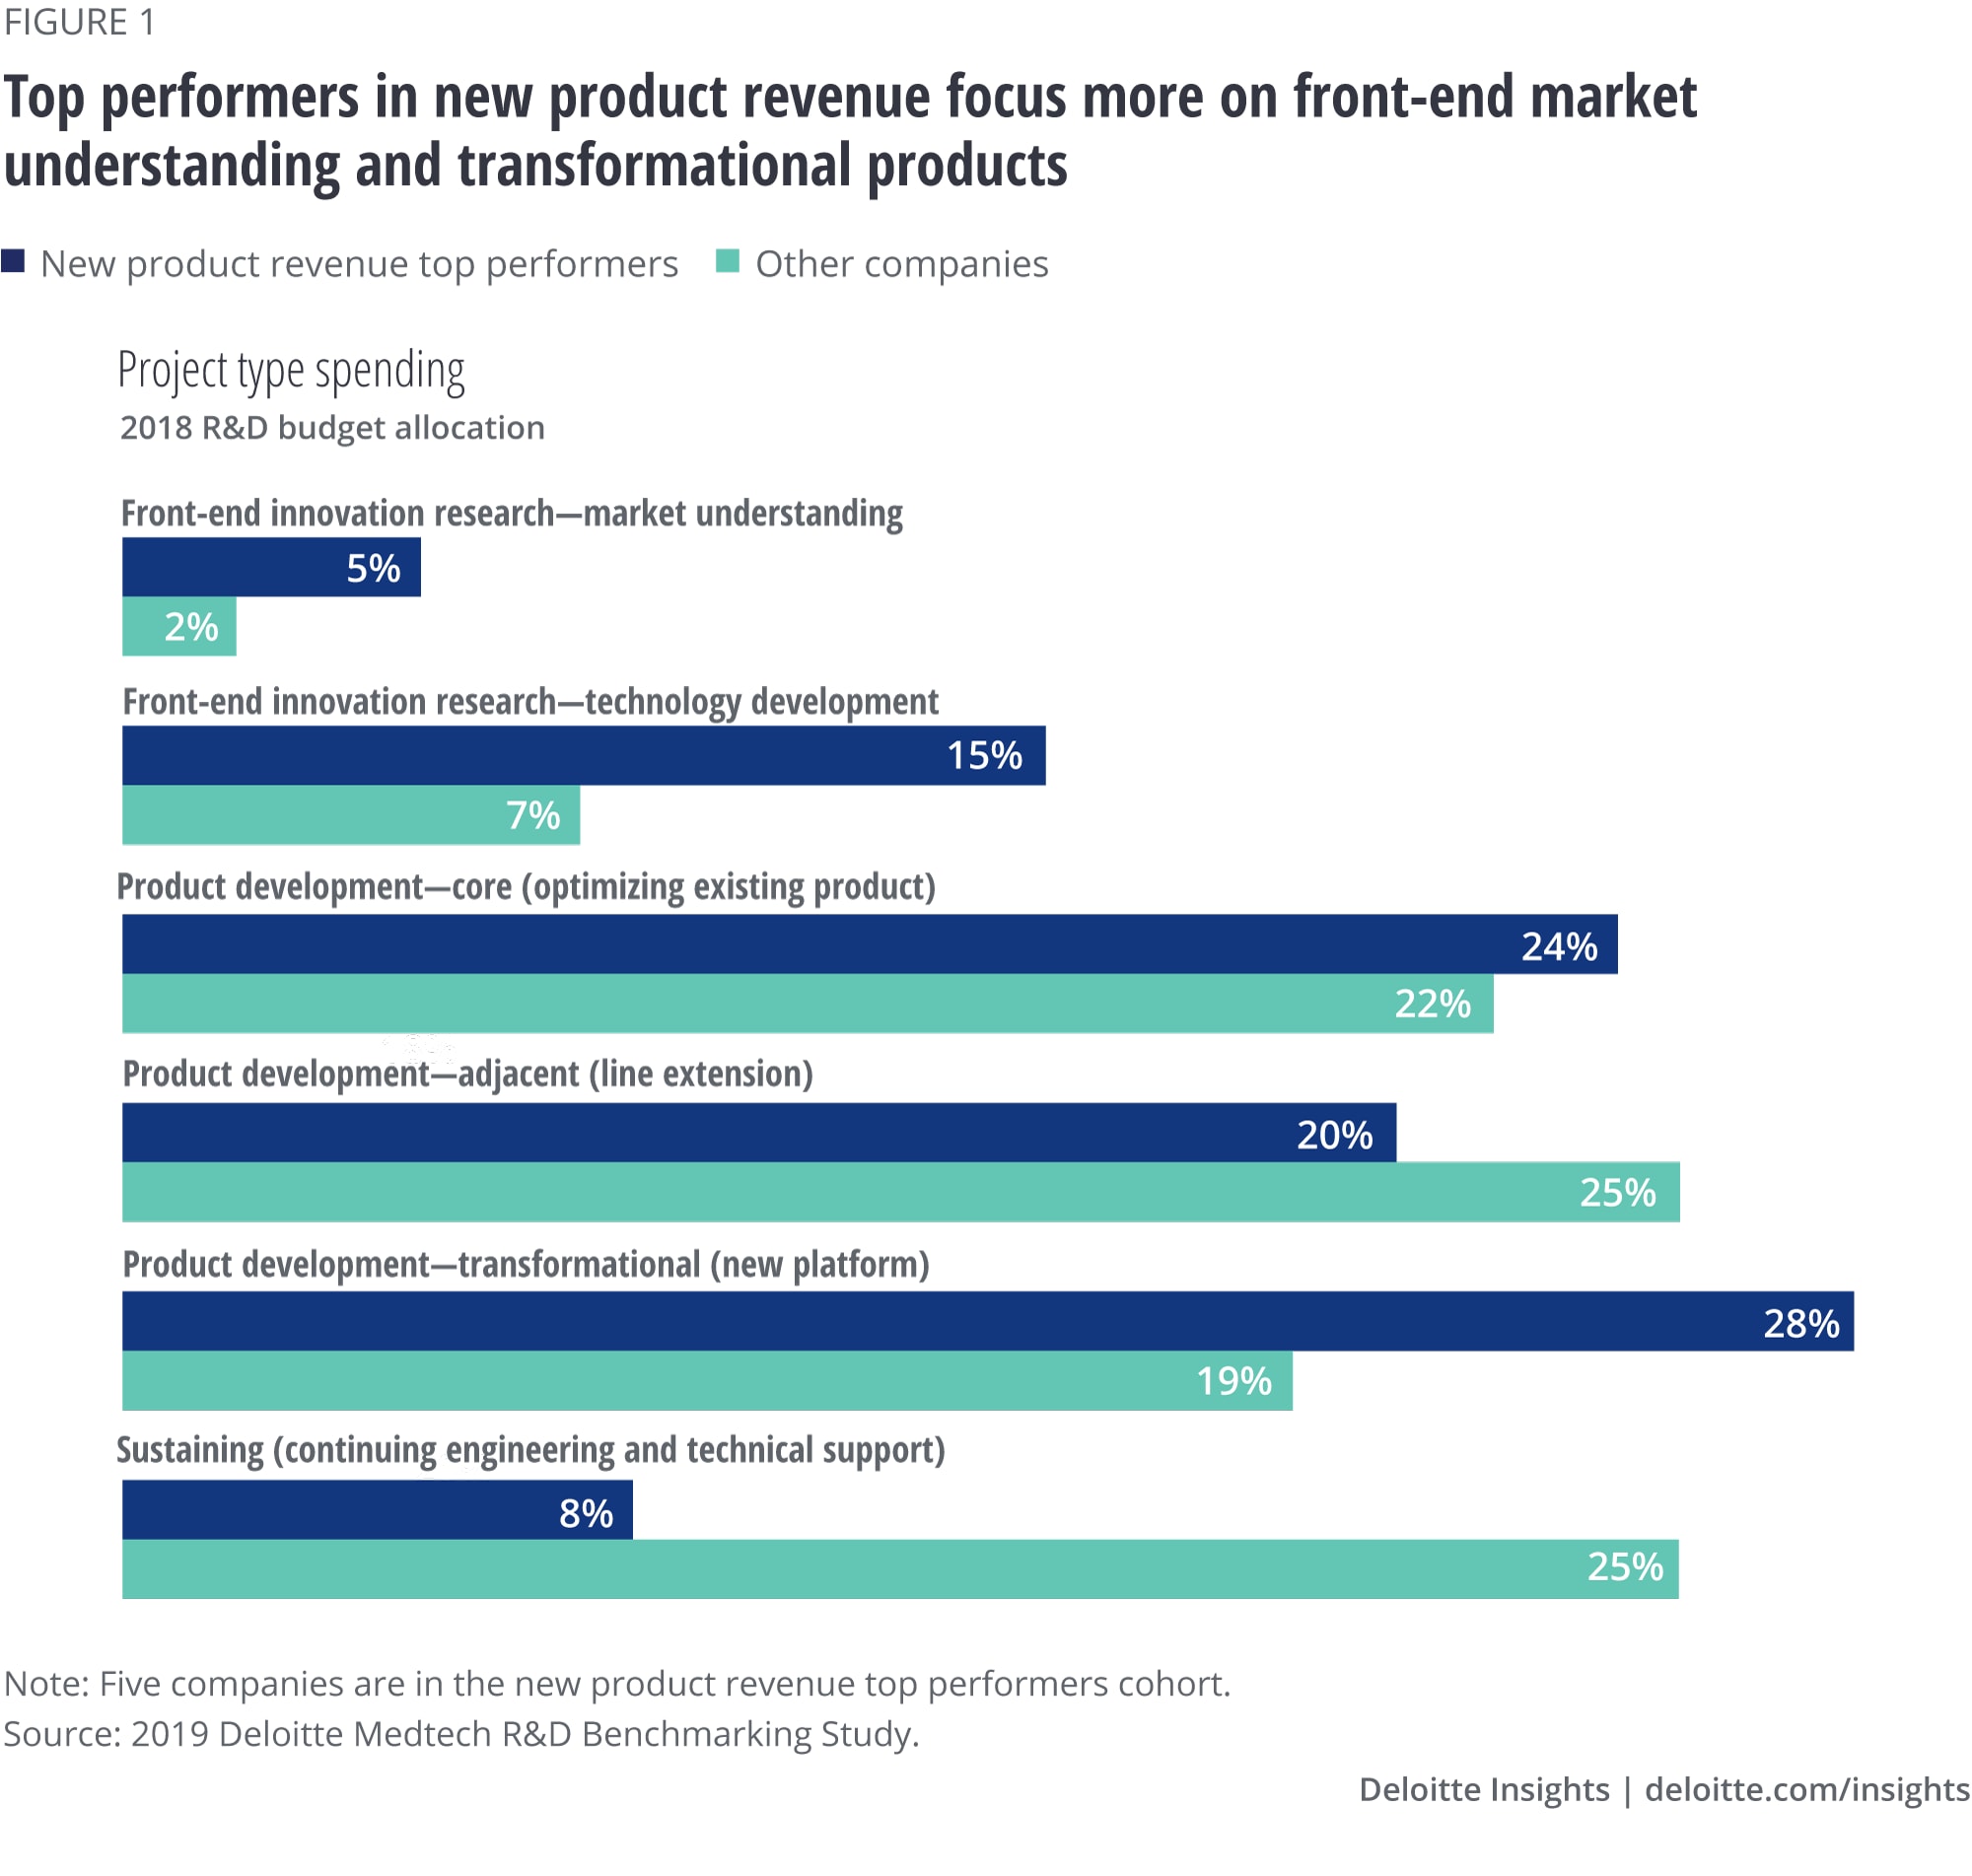 Top performers in new product revenue focus more on front-end market understanding and transformational products